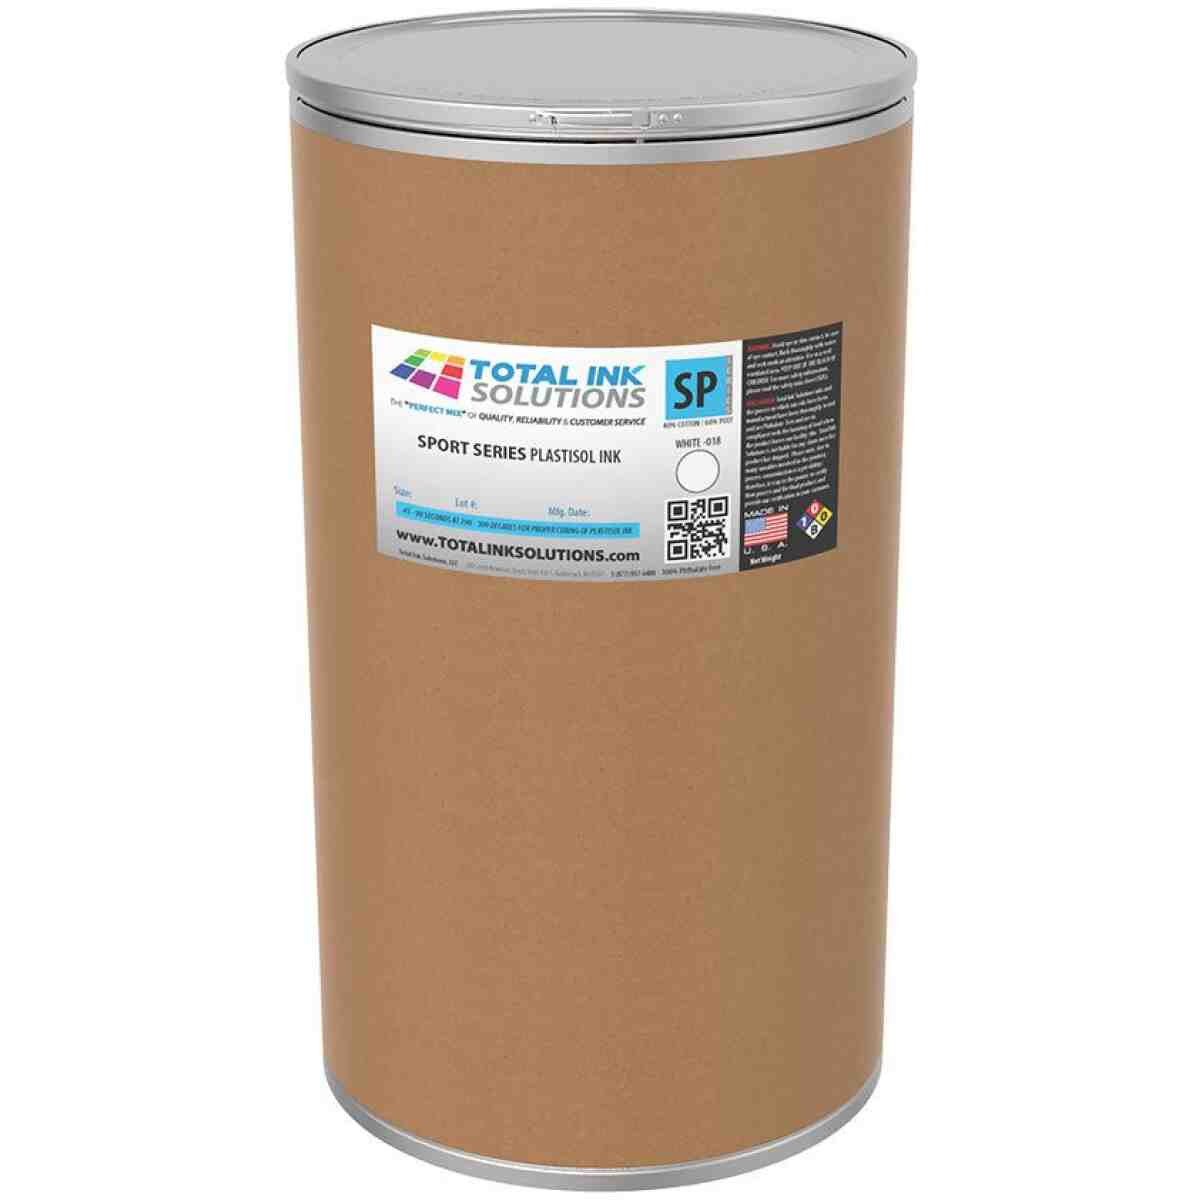 Sport White Plastisol Ink - 55 Gallons TOTAL INK SOLUTIONS®